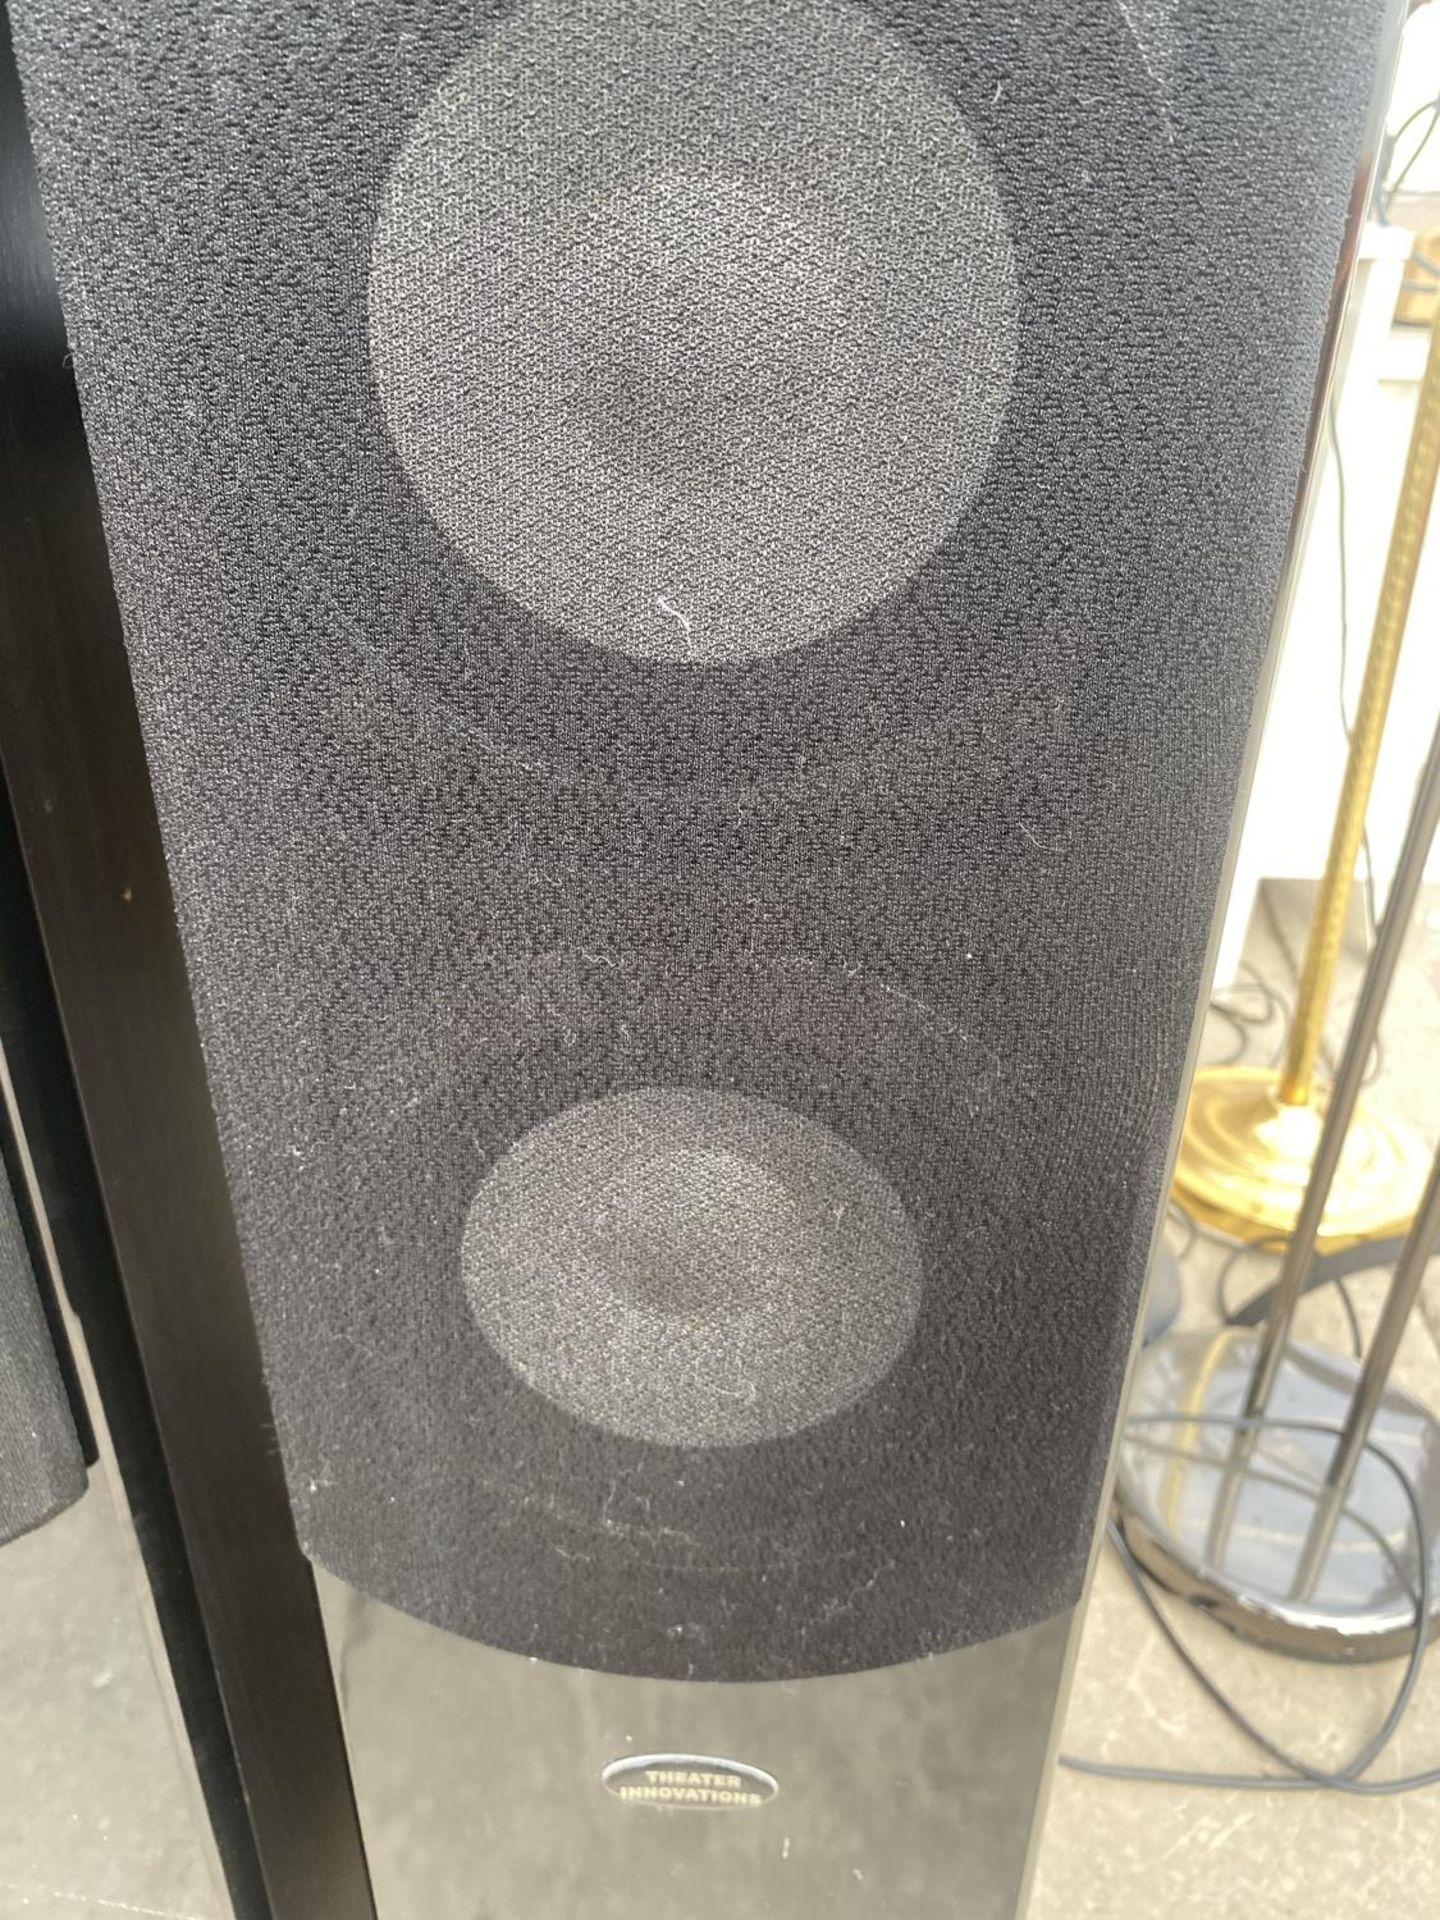 A PAIR OF TALL THEATER INNOVATIONS SPEAKERS BELIEVED IN WORKING ORDER BUT NO WARRANTY - Image 2 of 3